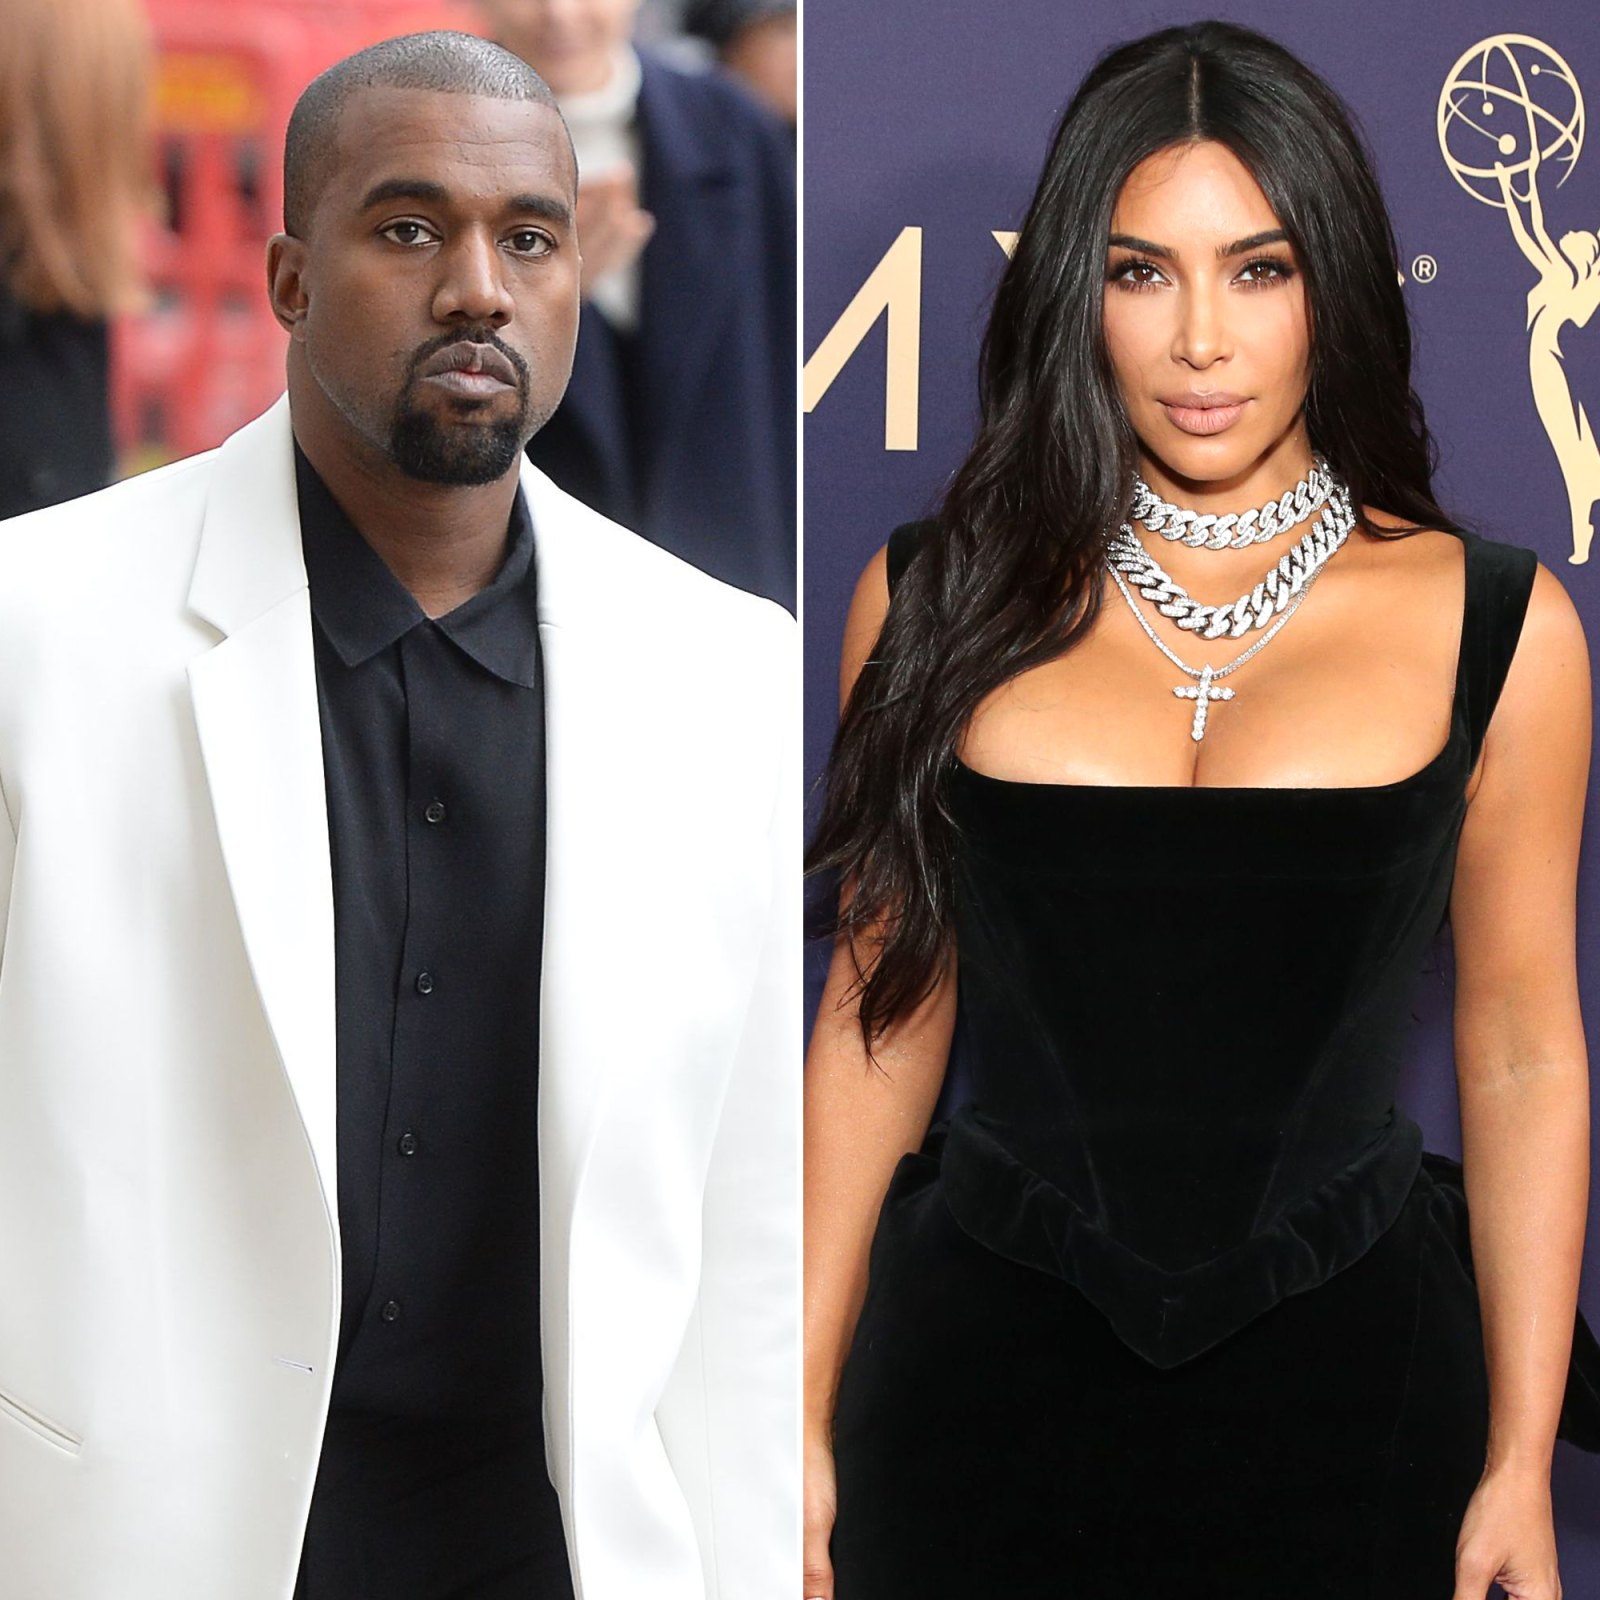 Kim Kardashian and Kanye West’s Divorce: Everything to Know About Their Messy Split